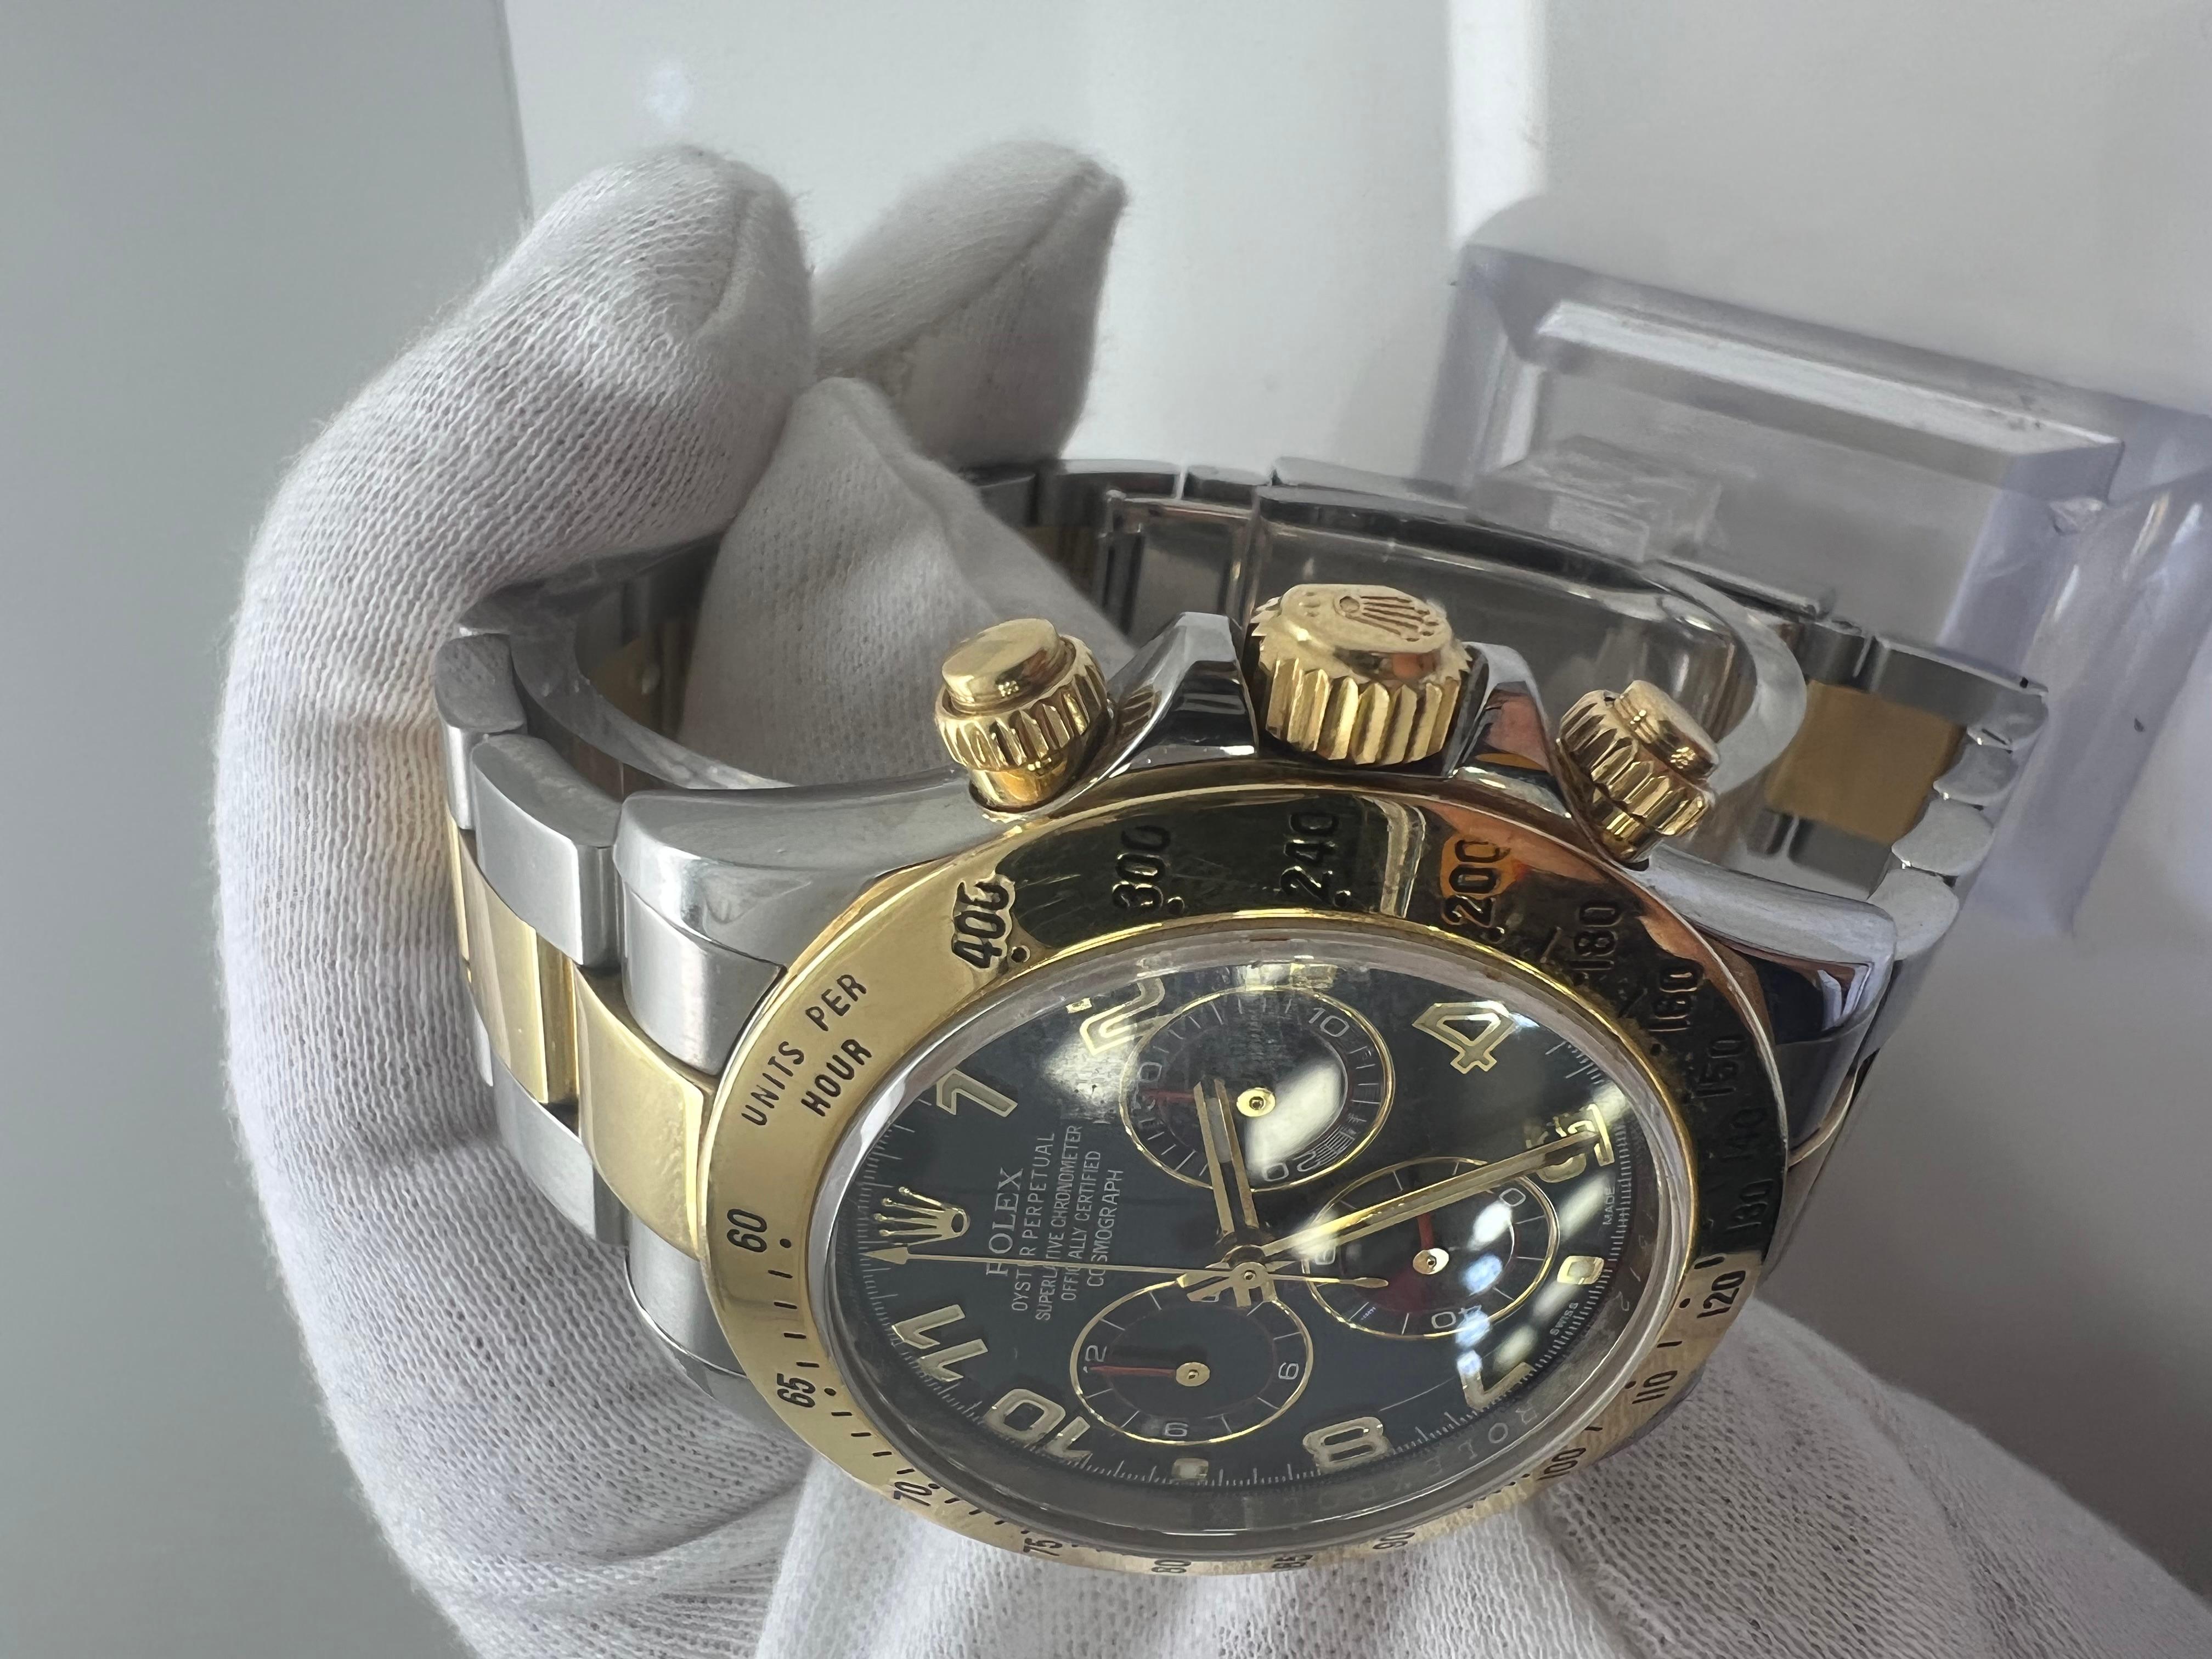 Rolex Daytona 116523 Two Tone Rare Blue Watch

All original Rolex parts

Excellent condition!!

Original Box and papers included

circa 2015

2 year warranty

Free overnight insured shipping!

Shop with confidence!

Evita diamonds